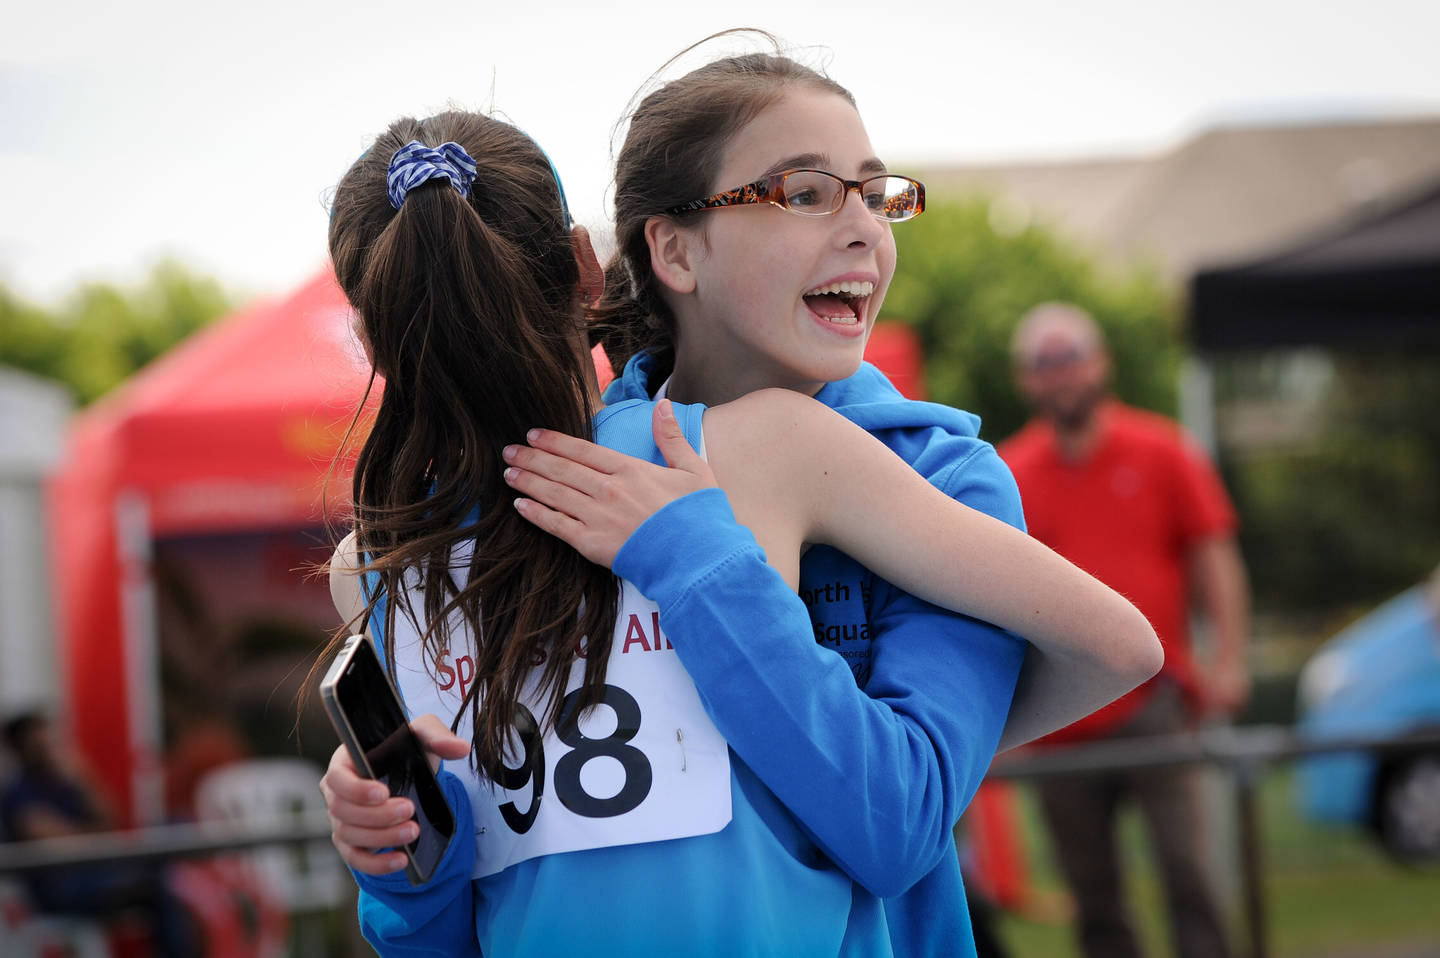 Two girl athletes hug after a race